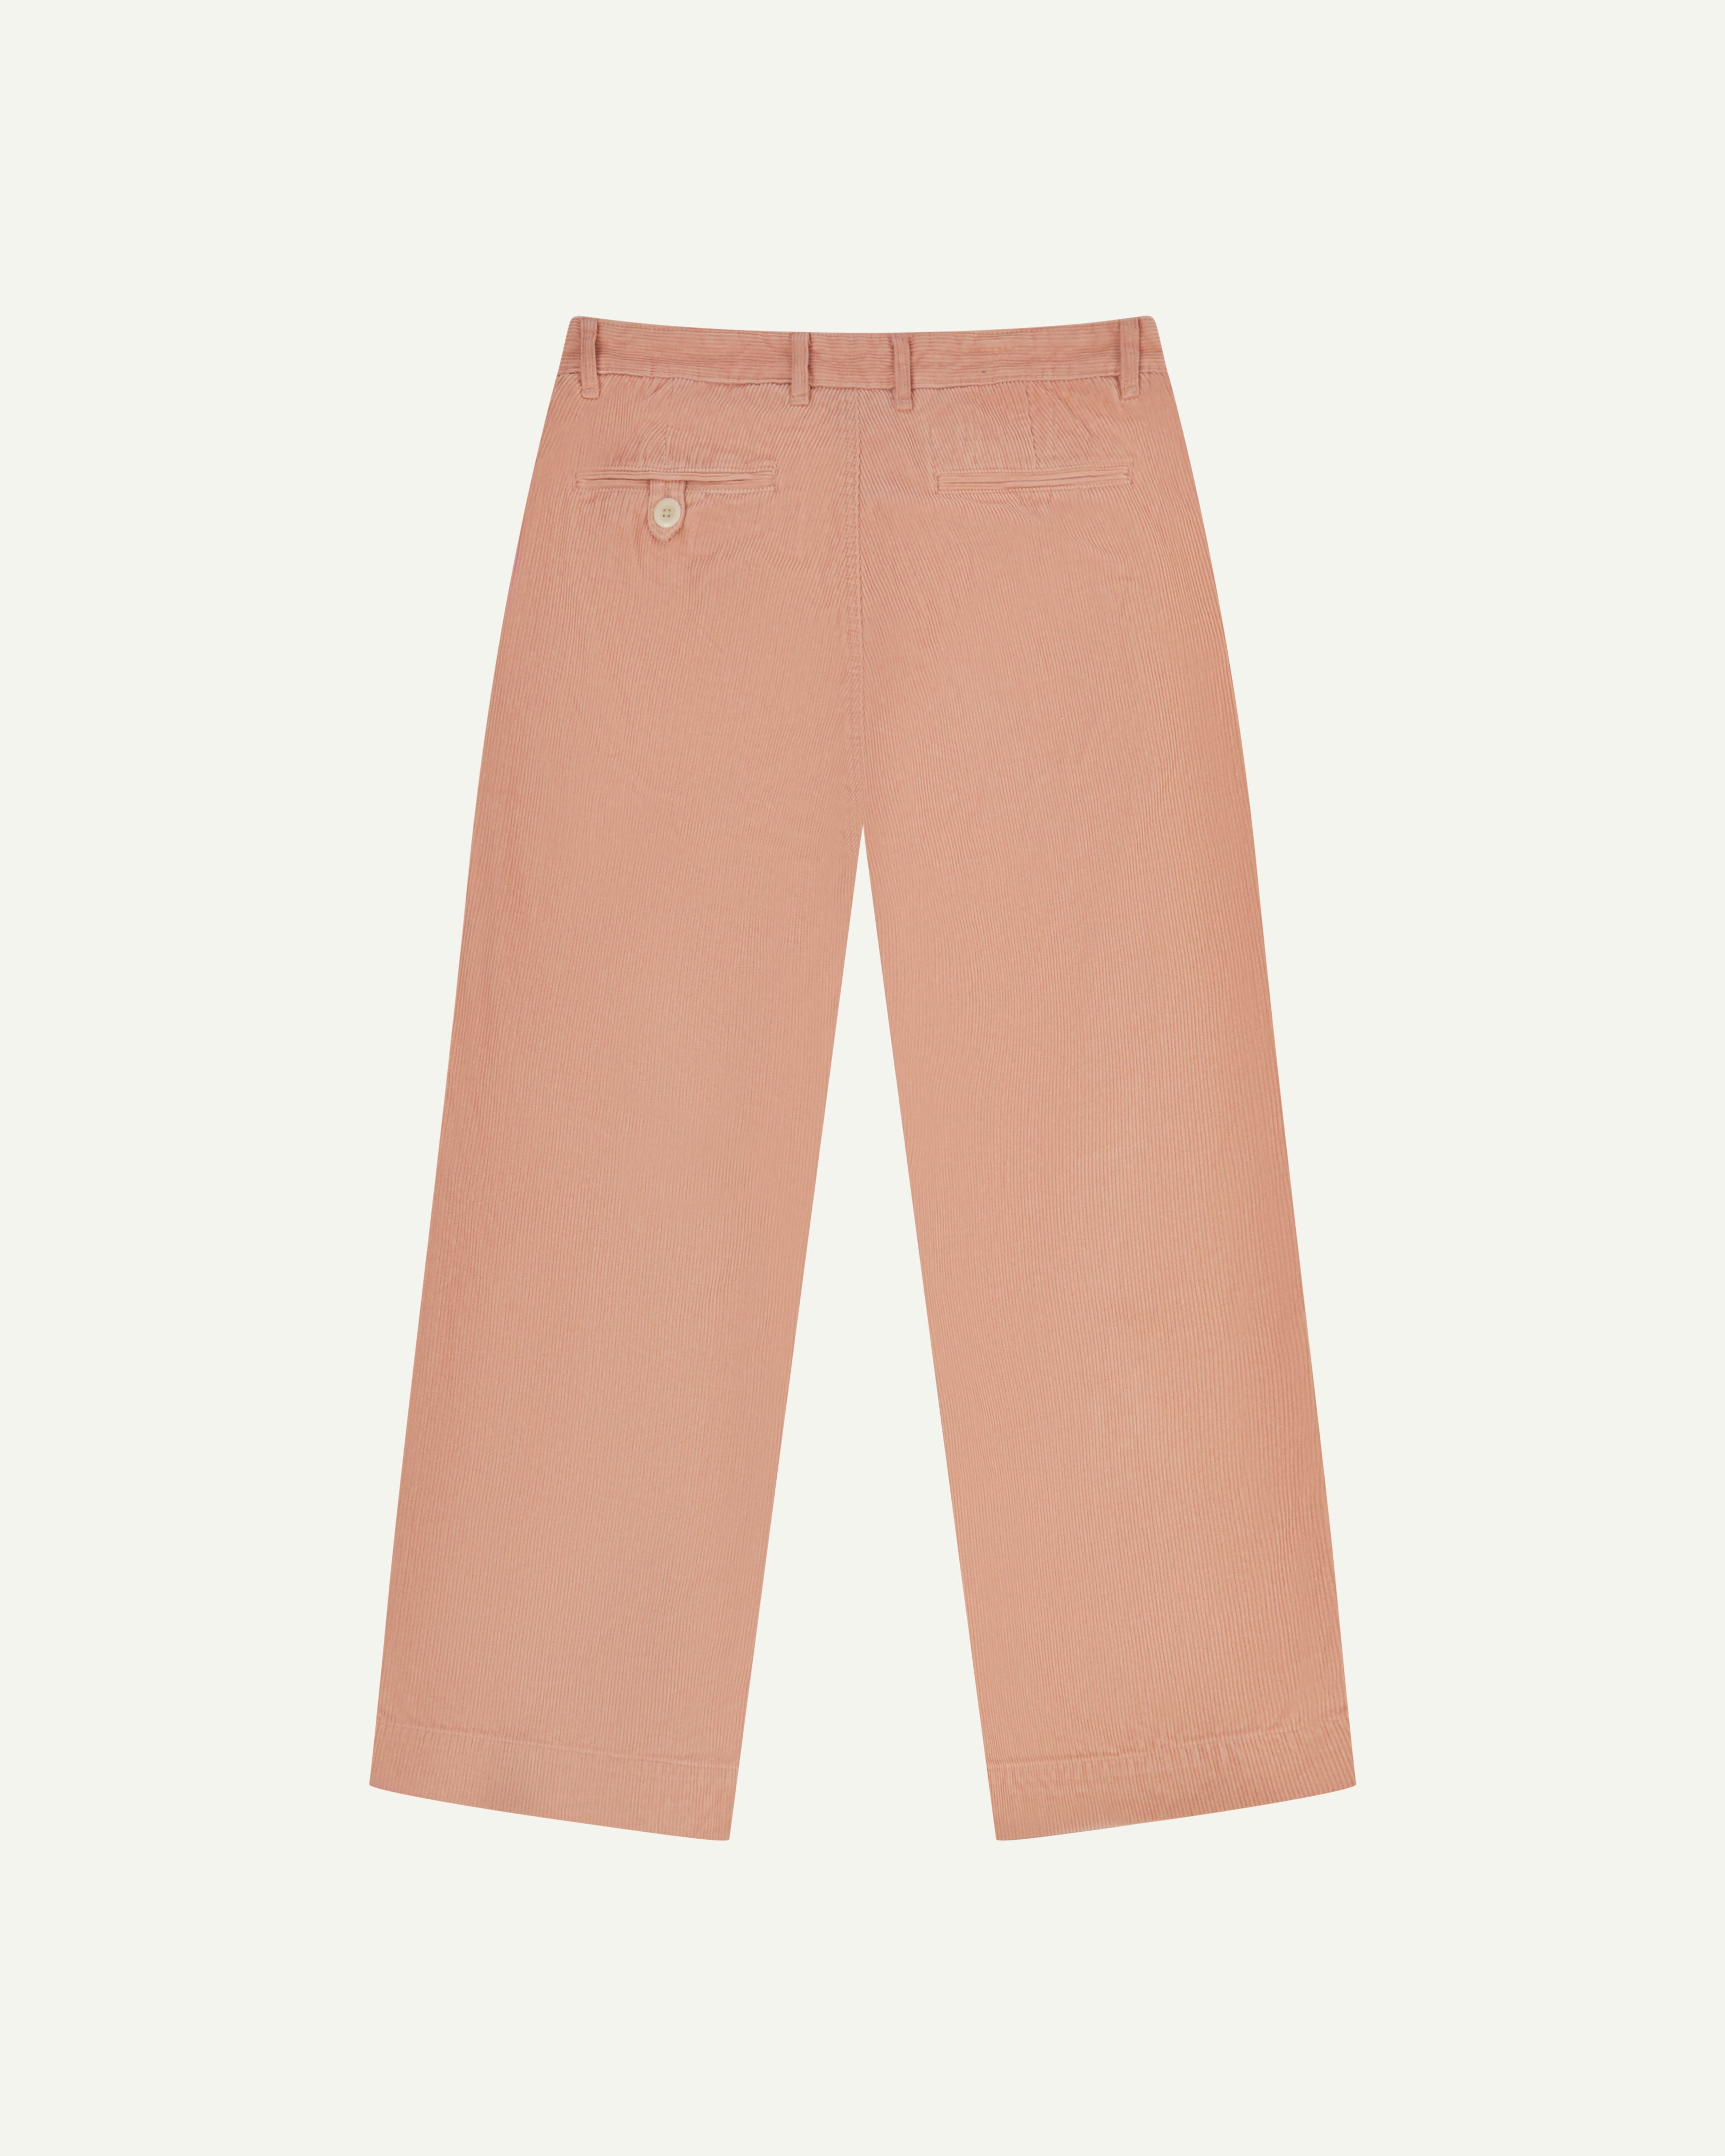 Back view of #5018 Uskees men's organic corduroy boat trousers in dusty pink showing wide leg style and buttoned back pocket.